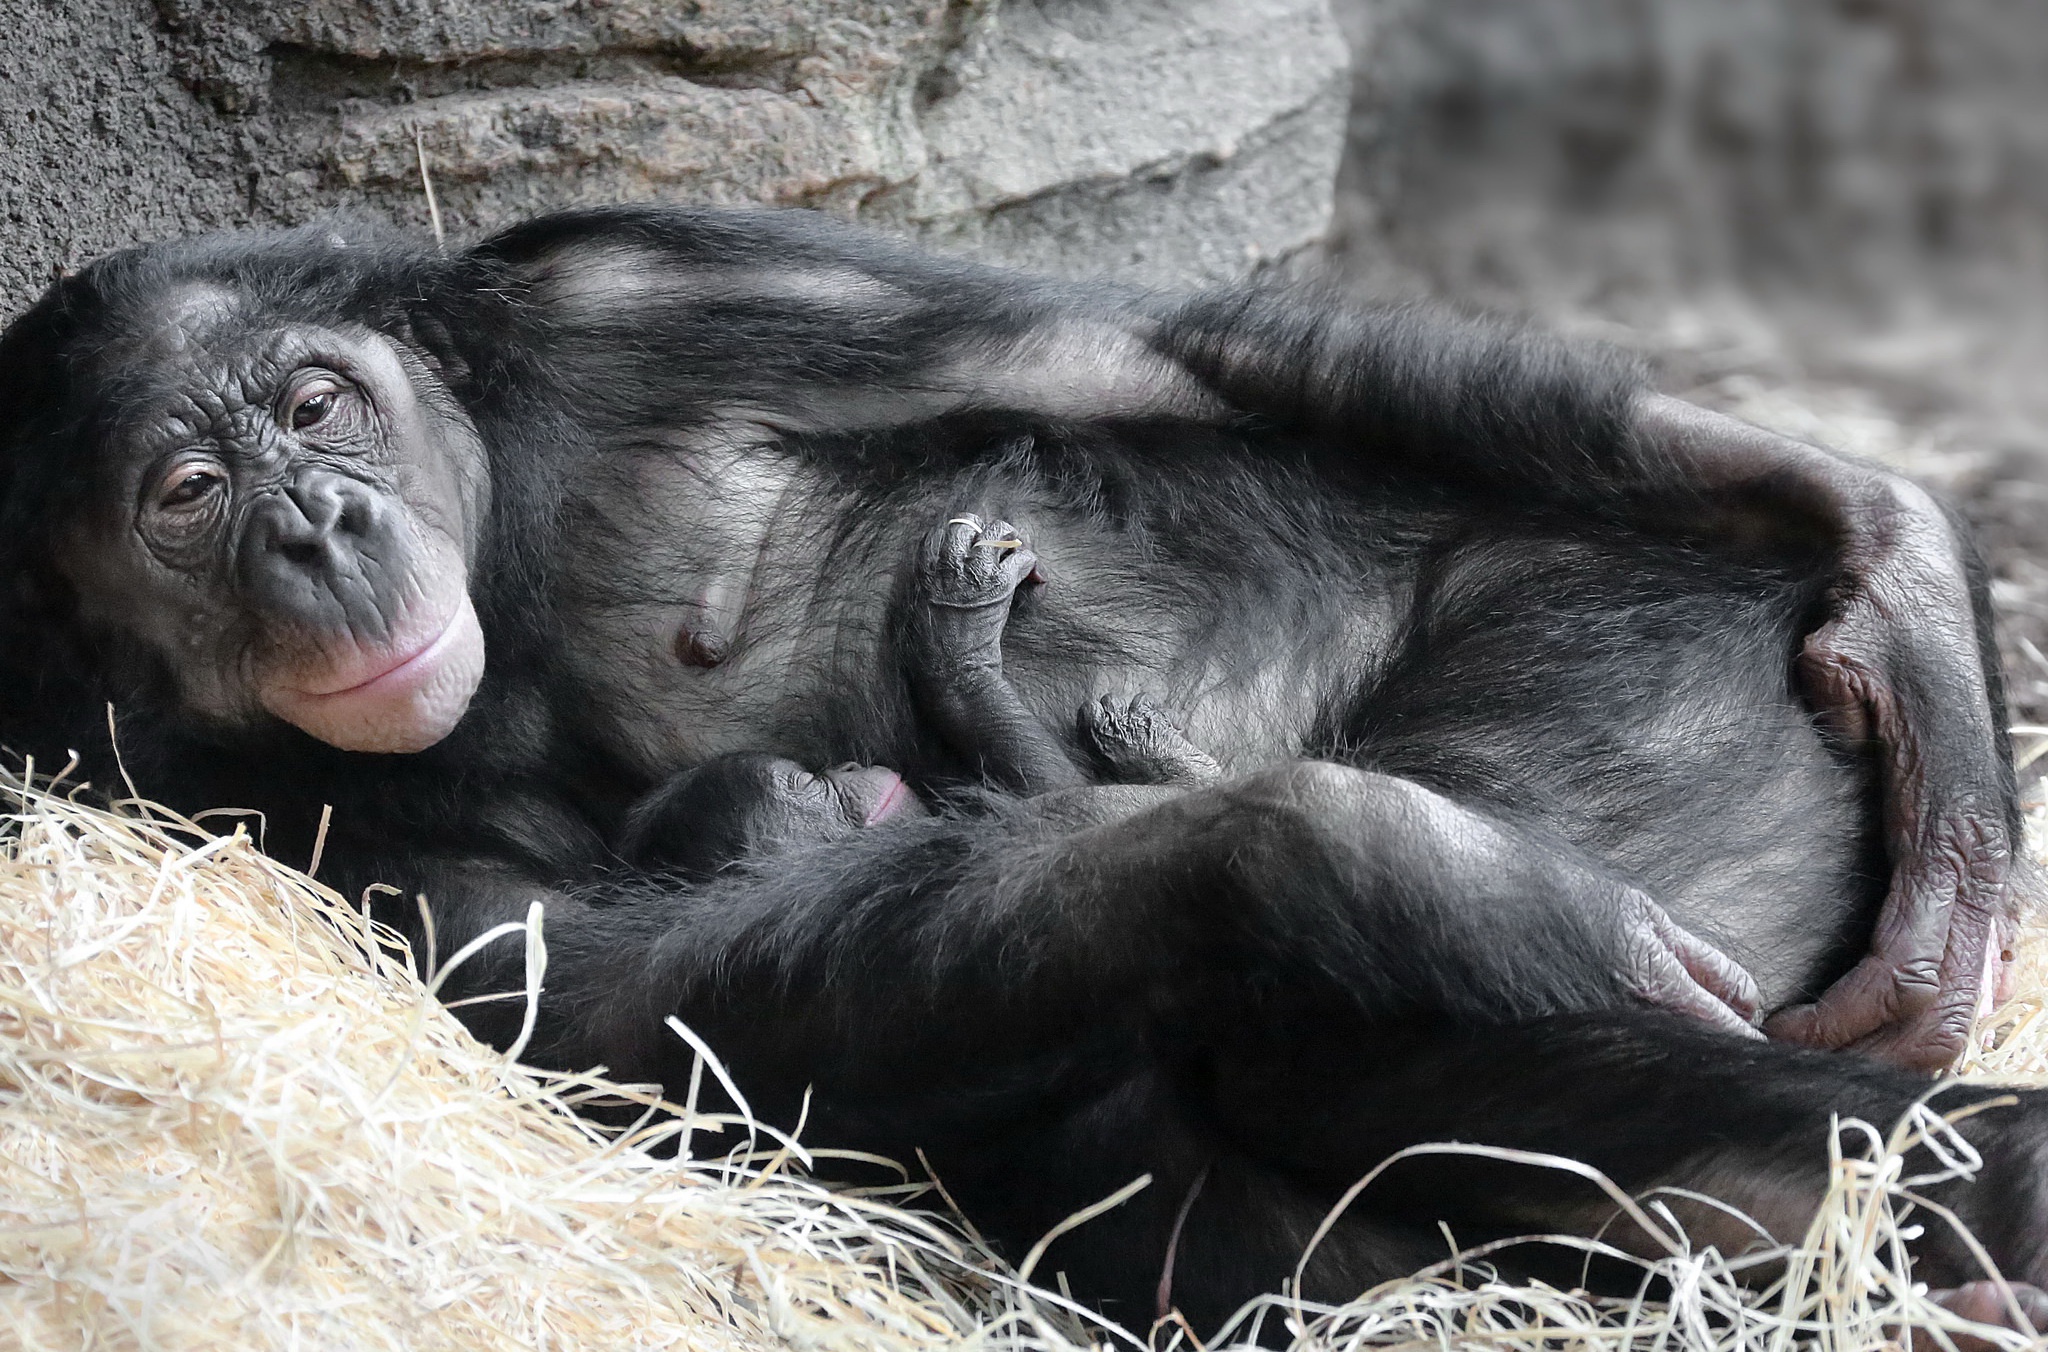 General 2048x1352 apes baby animals Mother sleeping mammals smiling animals